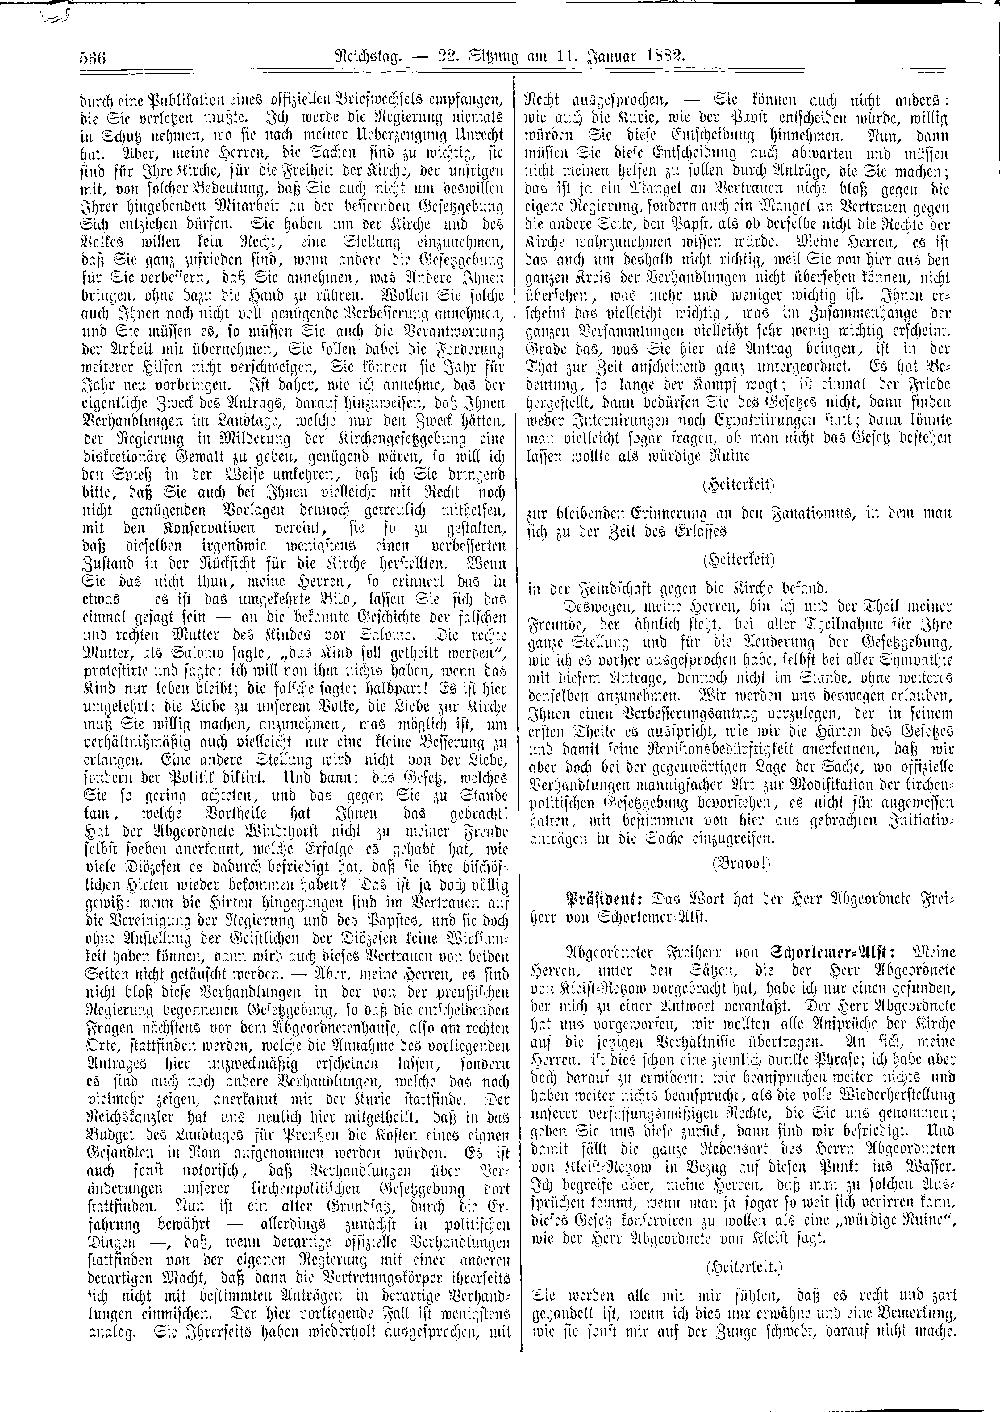 Scan of page 536